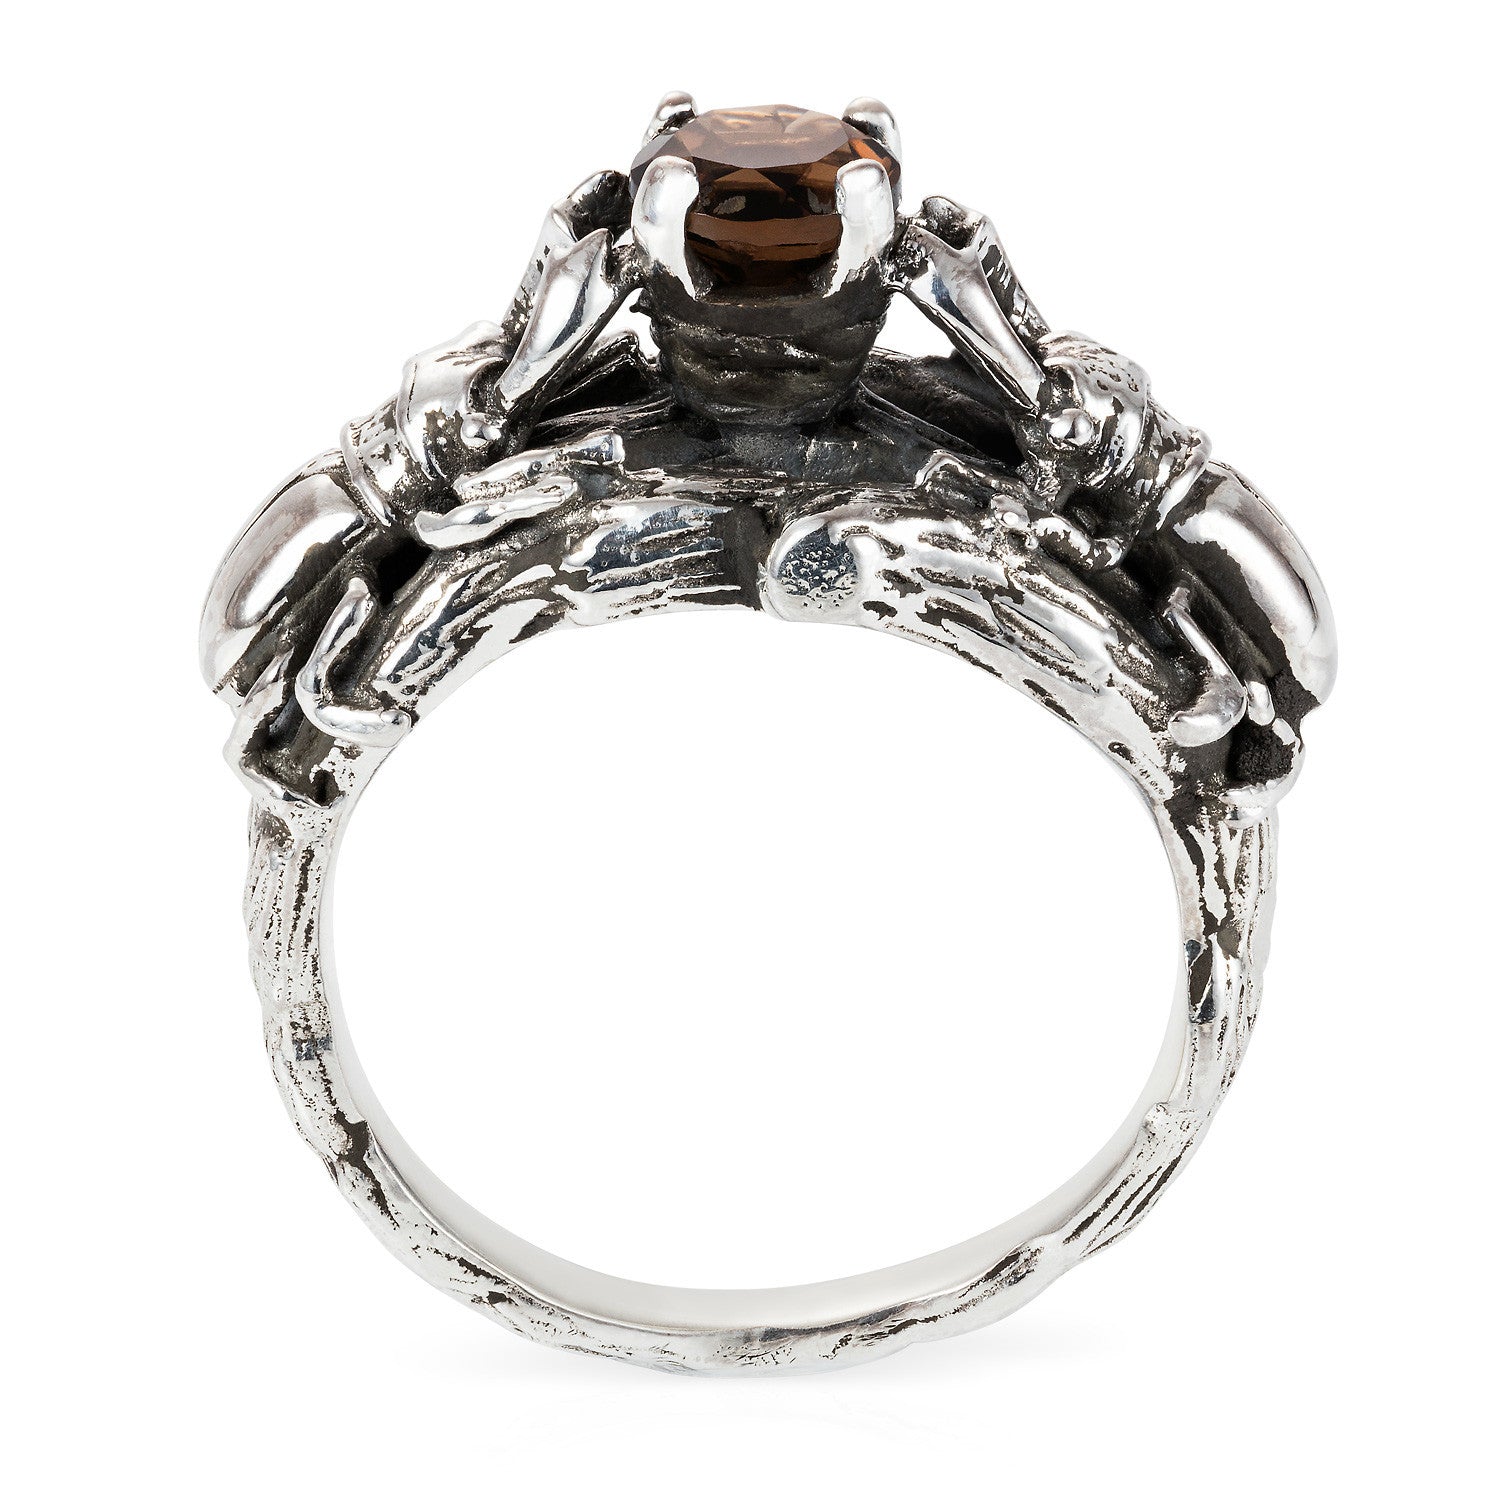 Little Stag Beetle Cocktail Ring with smokey quartz